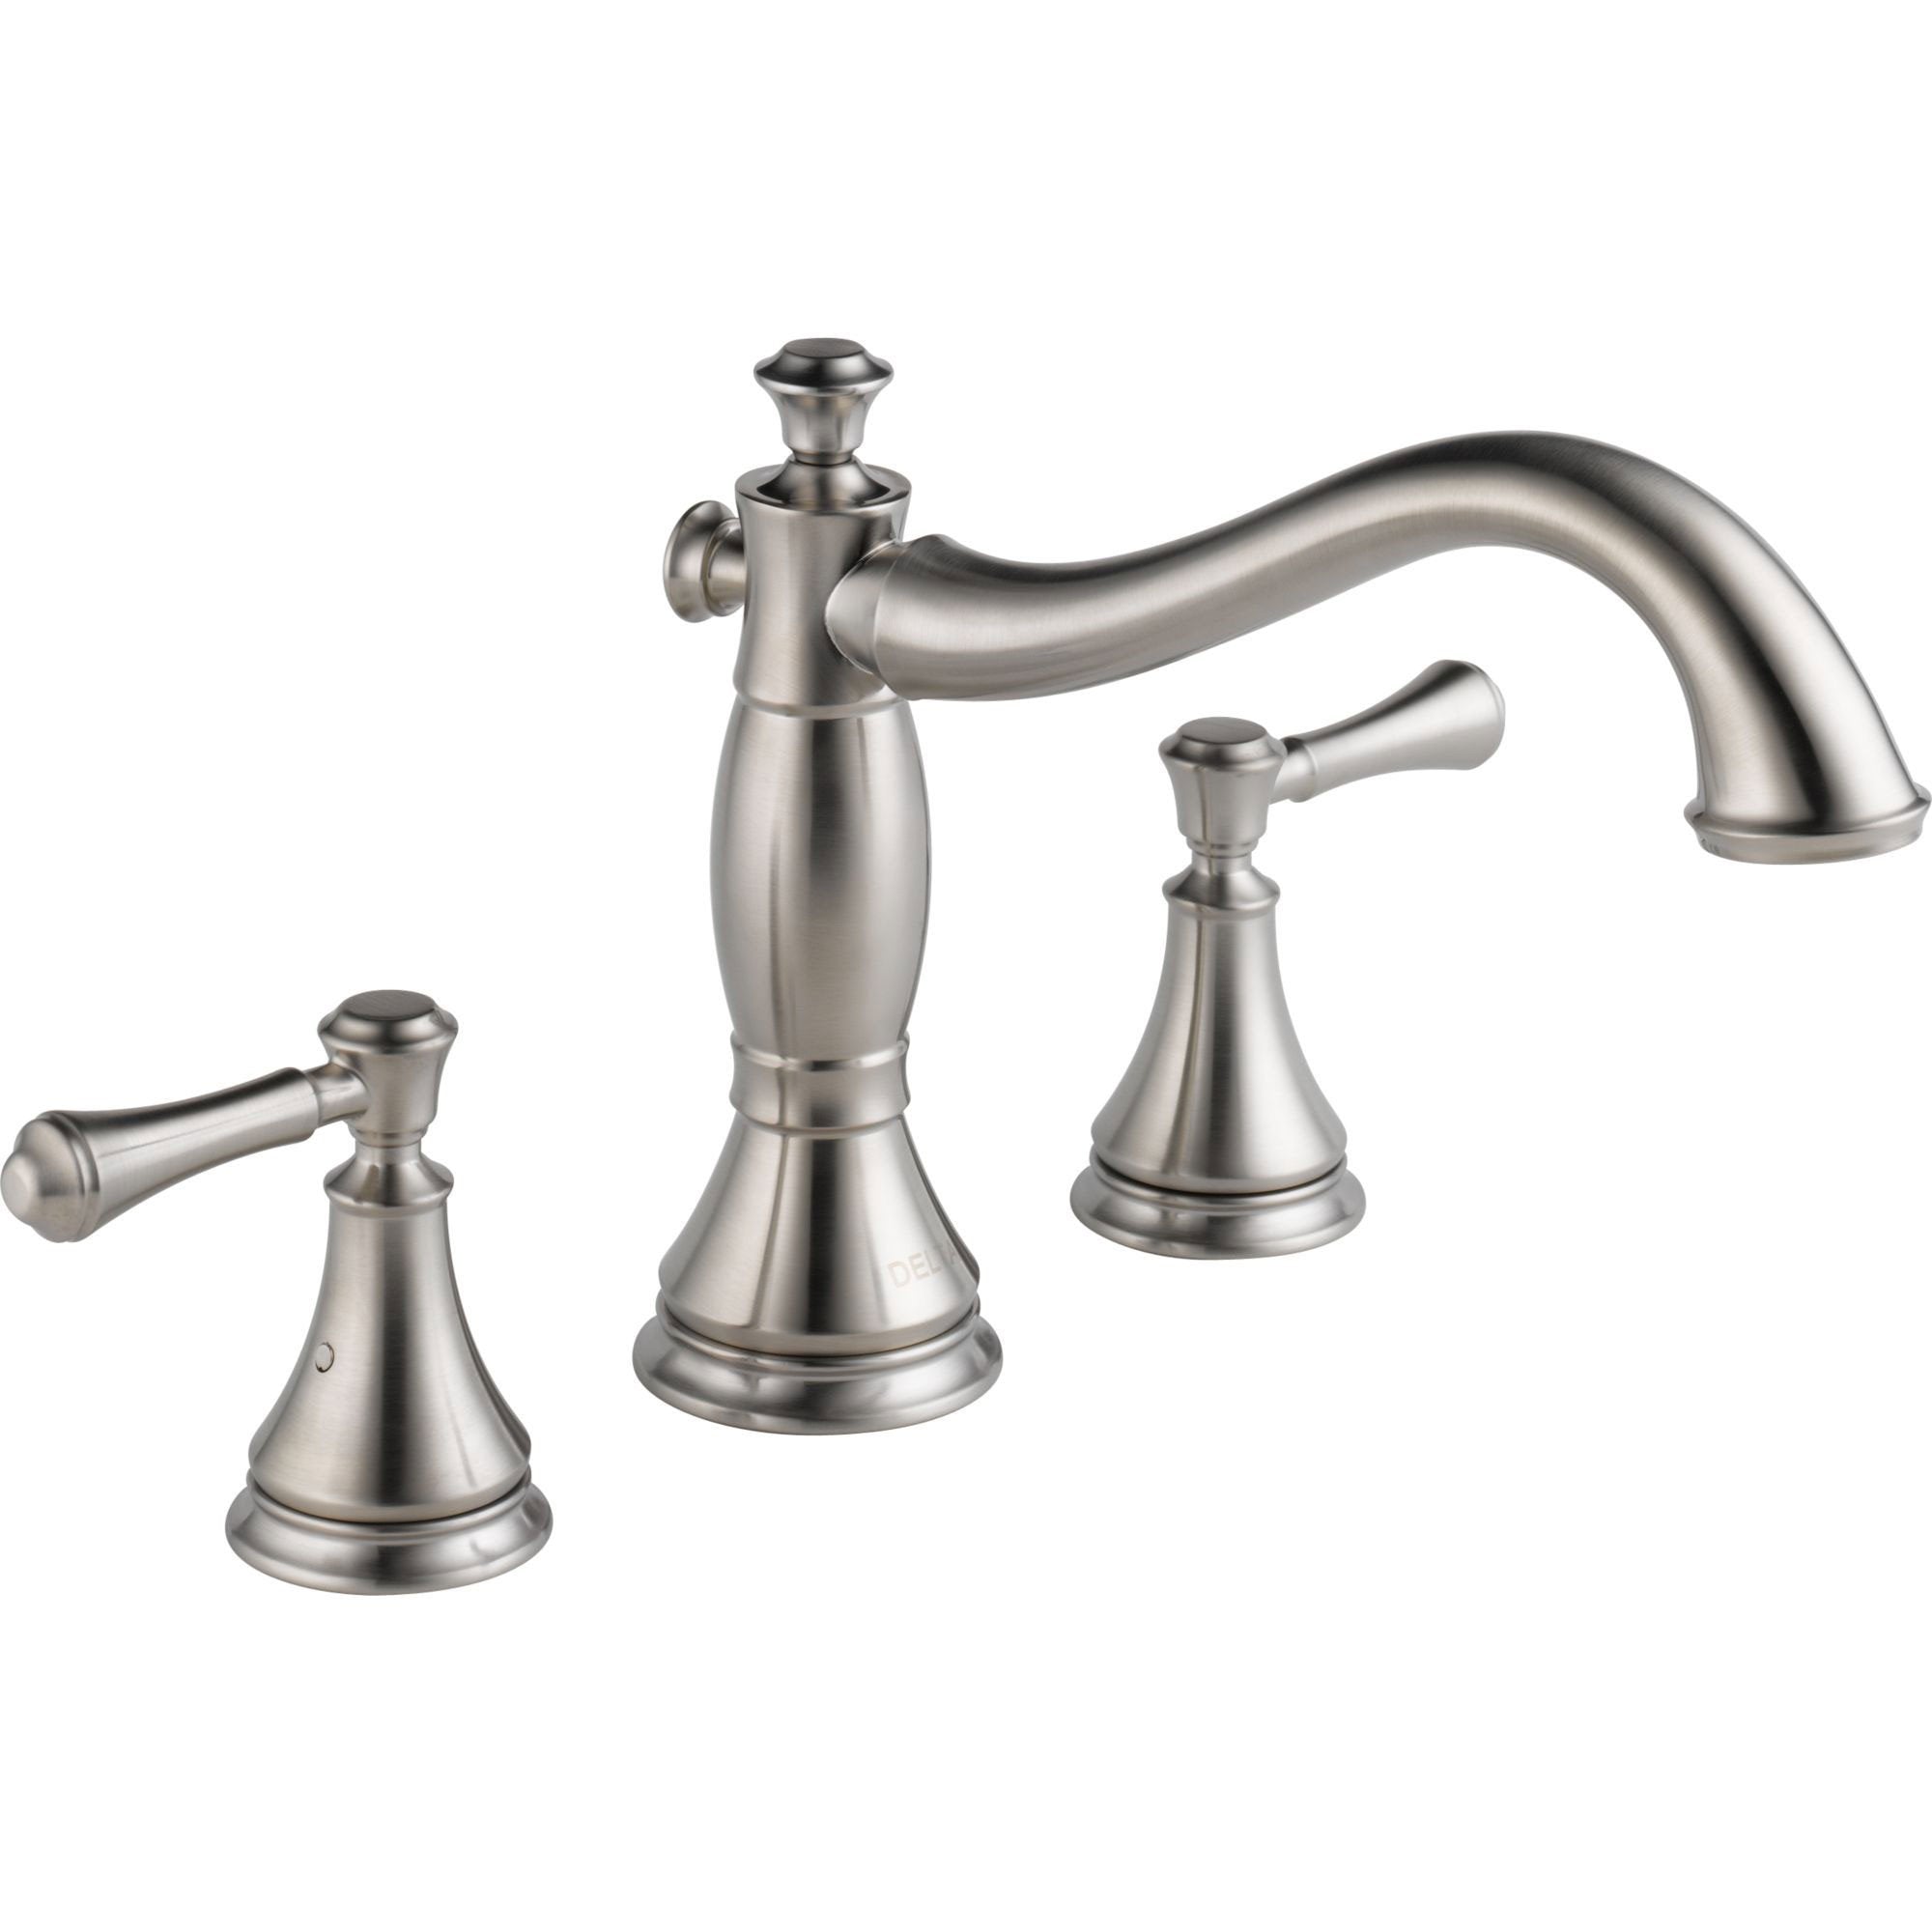 Delta Cassidy Stainless Steel Finish 3-Hole Roman Tub Filler Faucet INCLUDES Valve and Lever Handles D1082V